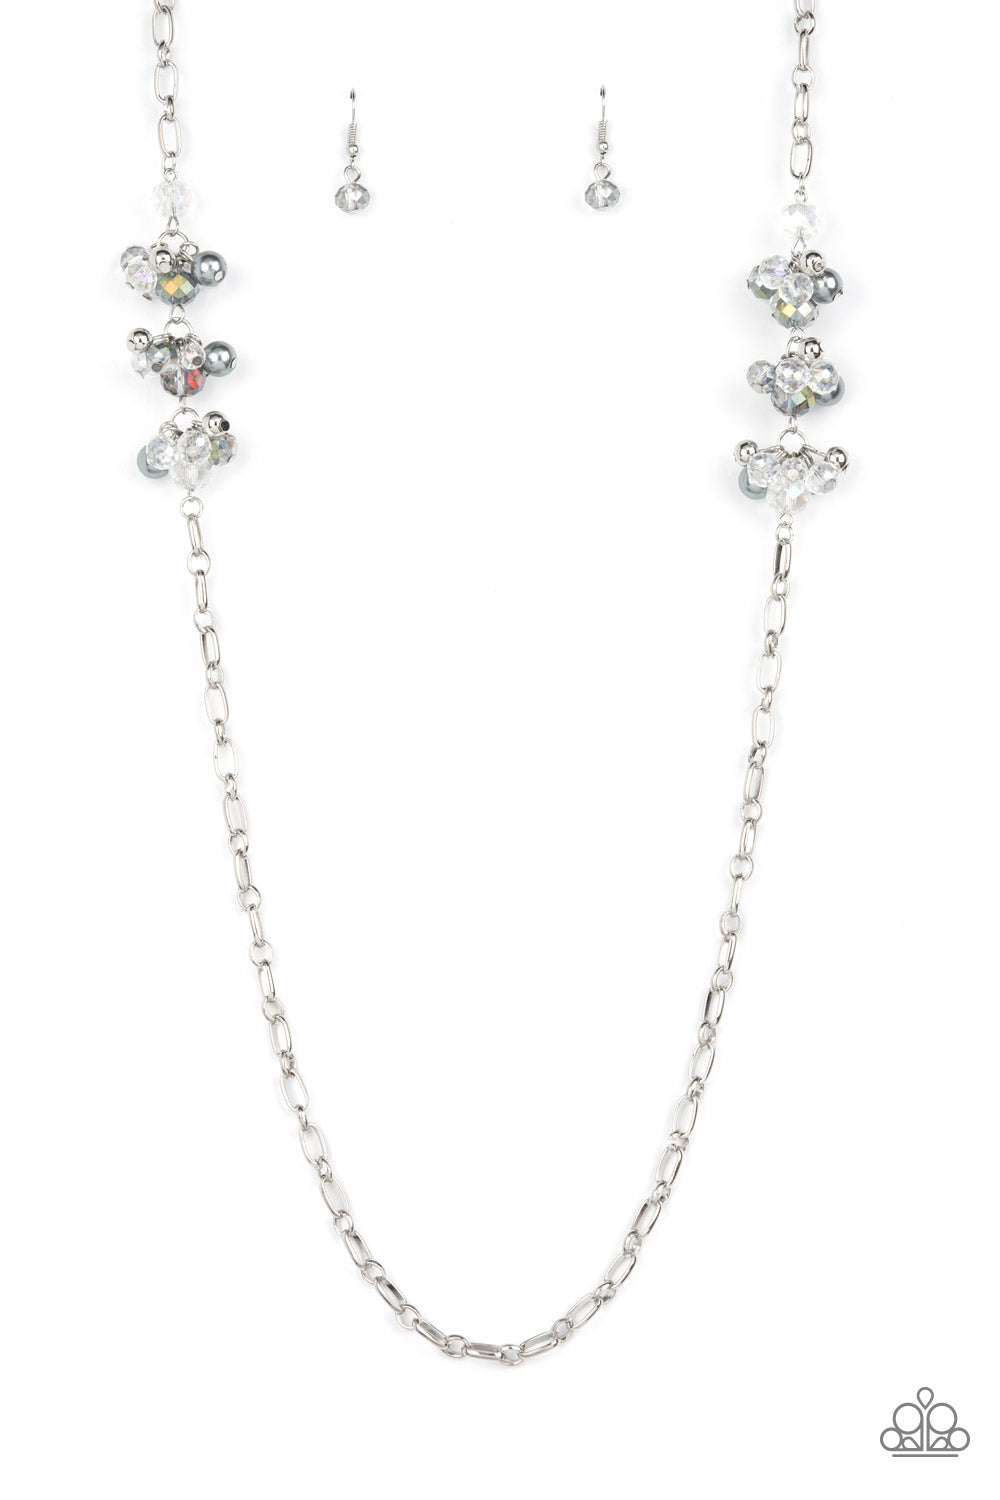 Poshly Parisian Paparazzi Accessories Necklace with Earrings Silver